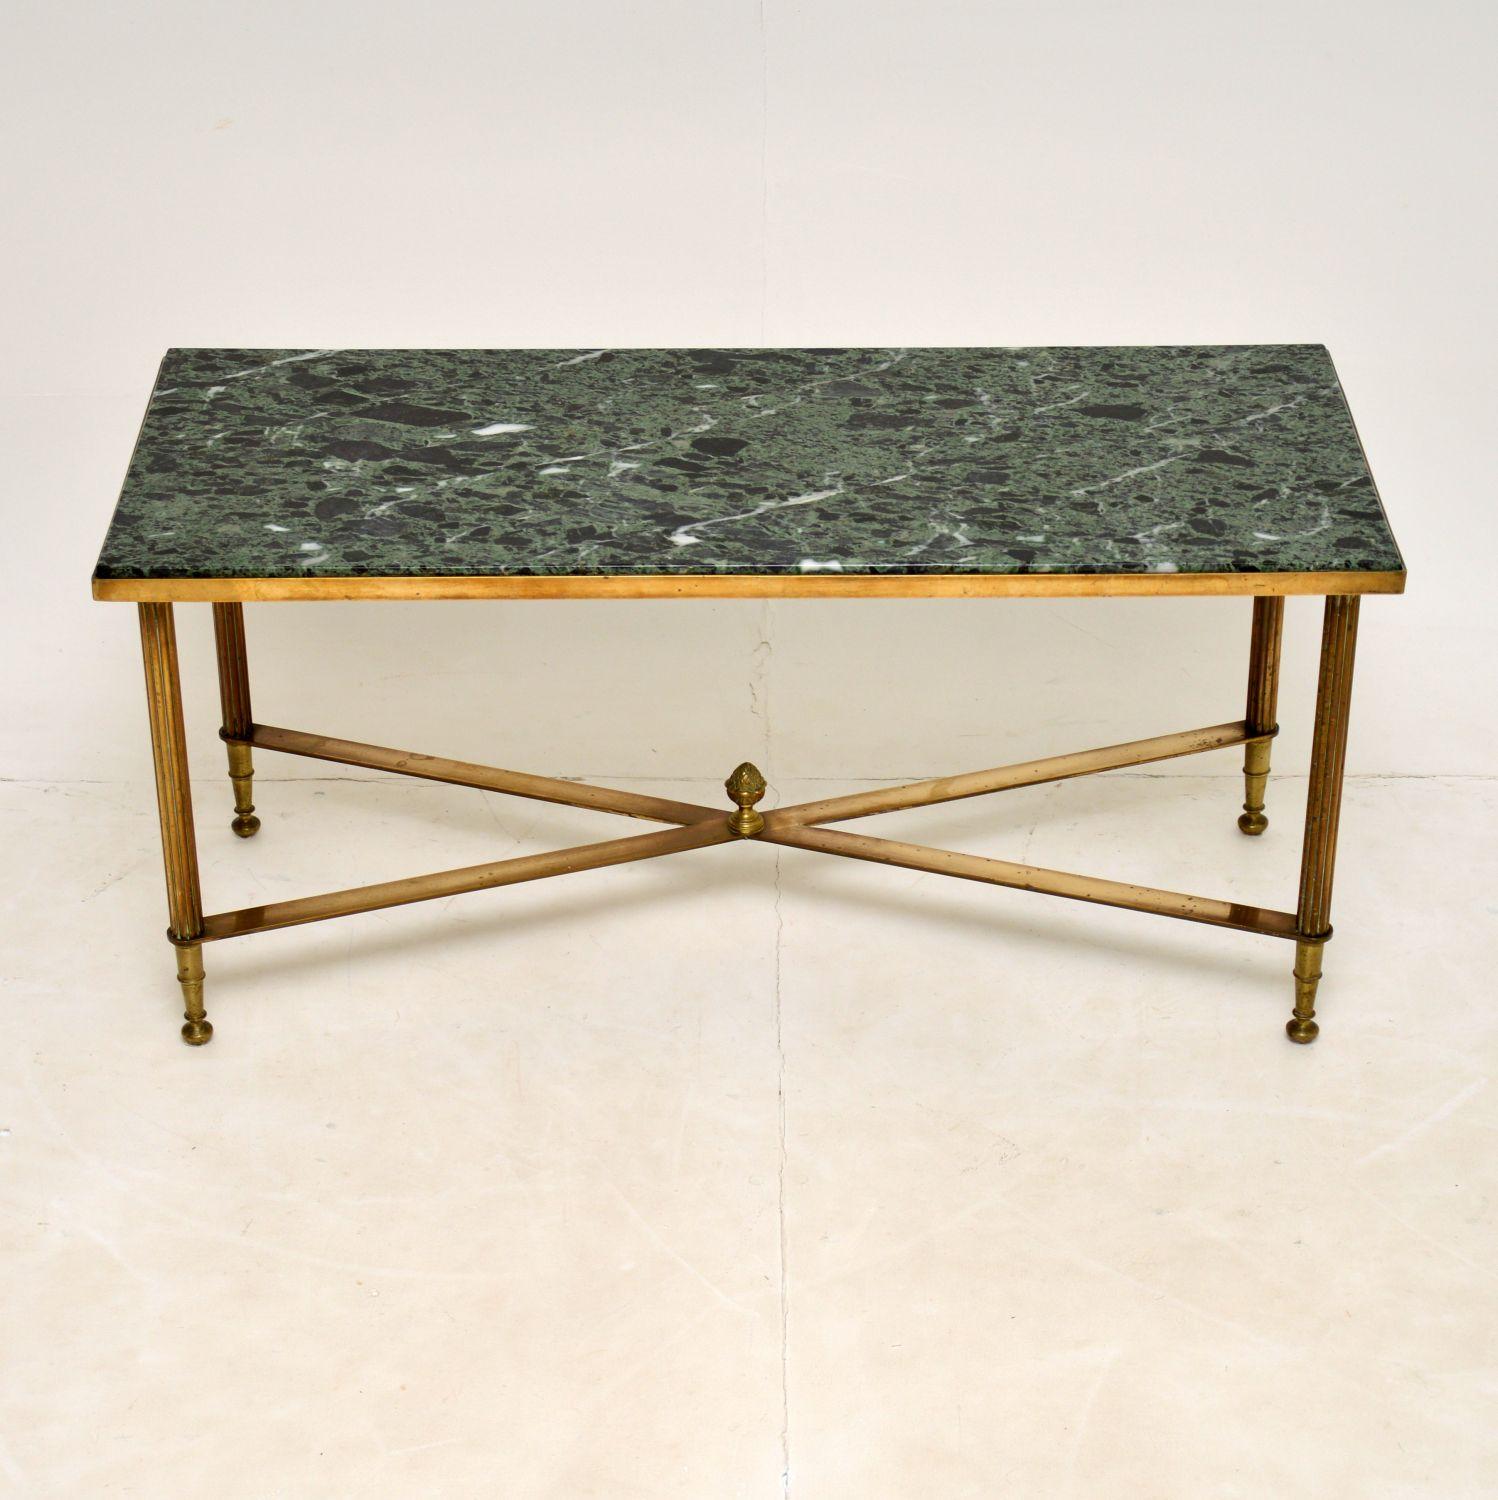 A stunning and extremely well made vintage coffee table in solid brass, with an inset marble top. This was made in France, it dates from the 1950-60’s.

The quality is absolutely superb, the solid brass frame is finely crafted with lovely detail.